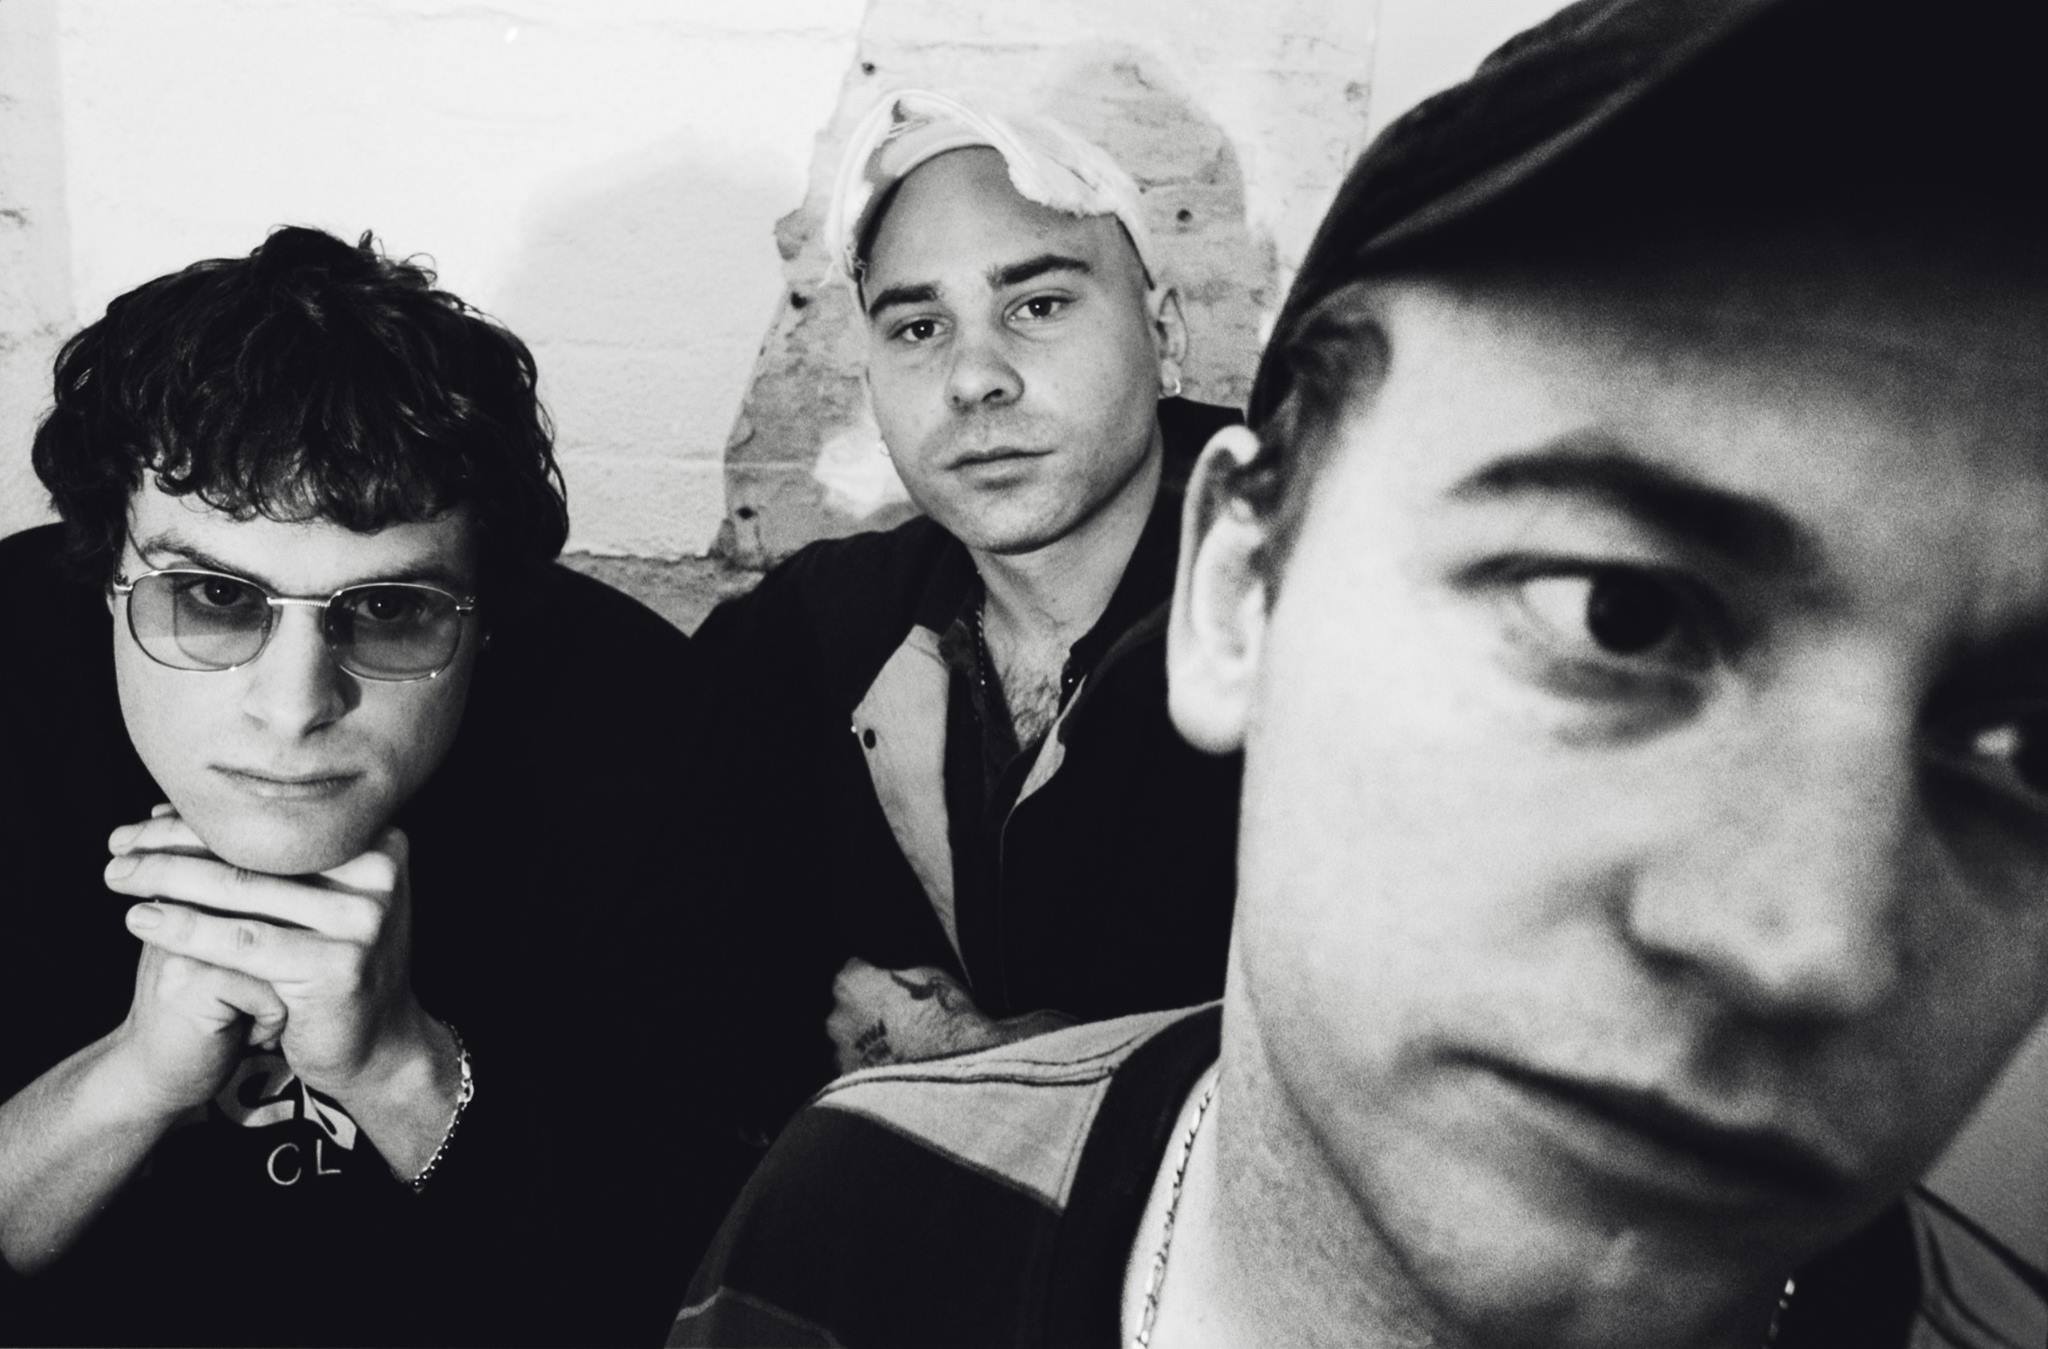 DMA’S and Cosmo’s Midnight added to triple j